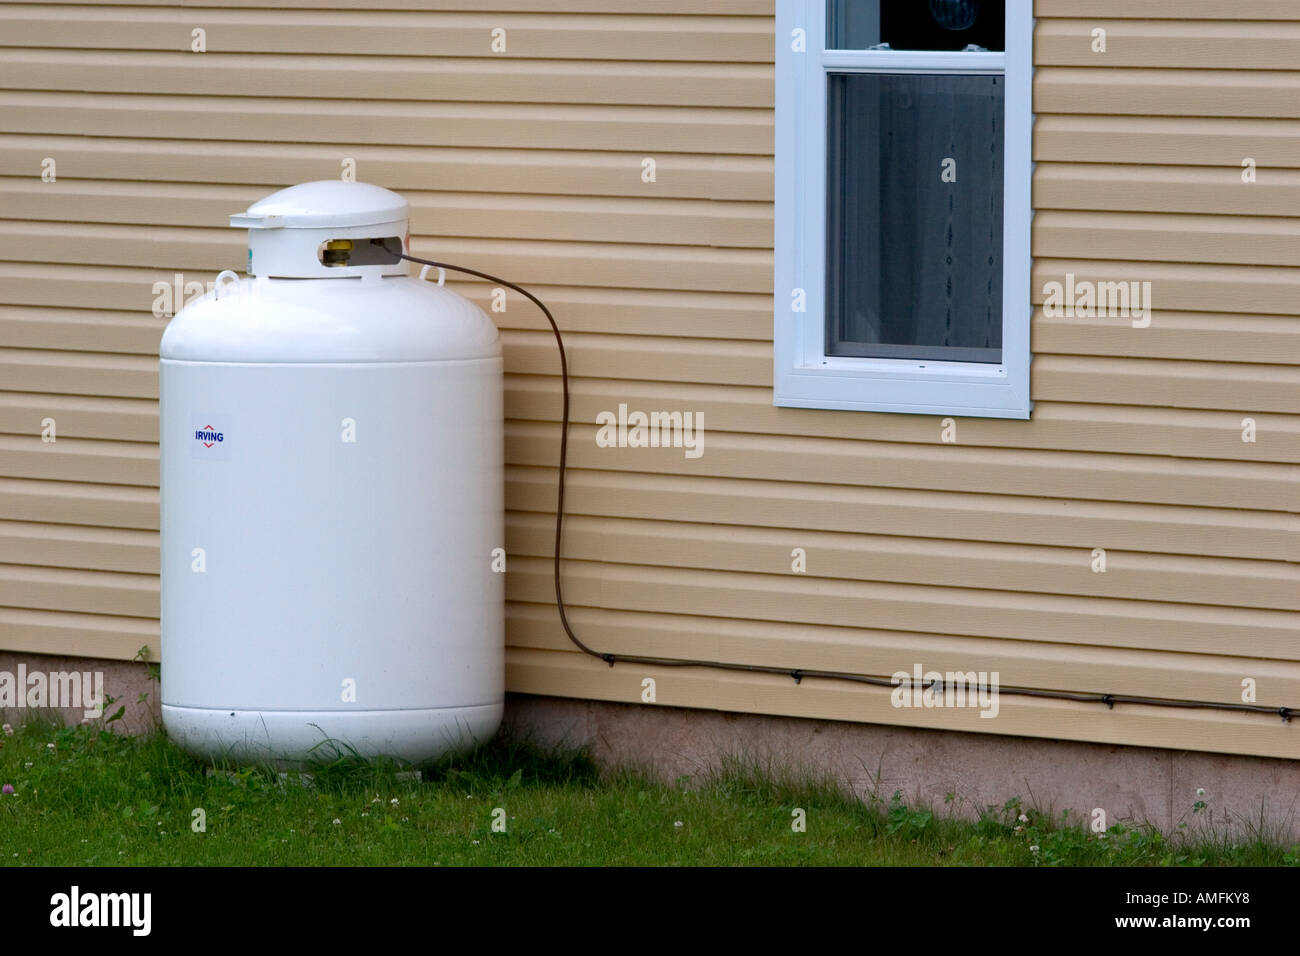 Propane fuel tank outside a house with supply line Stock Photo: 8714743 Ran Out Of Propane In House